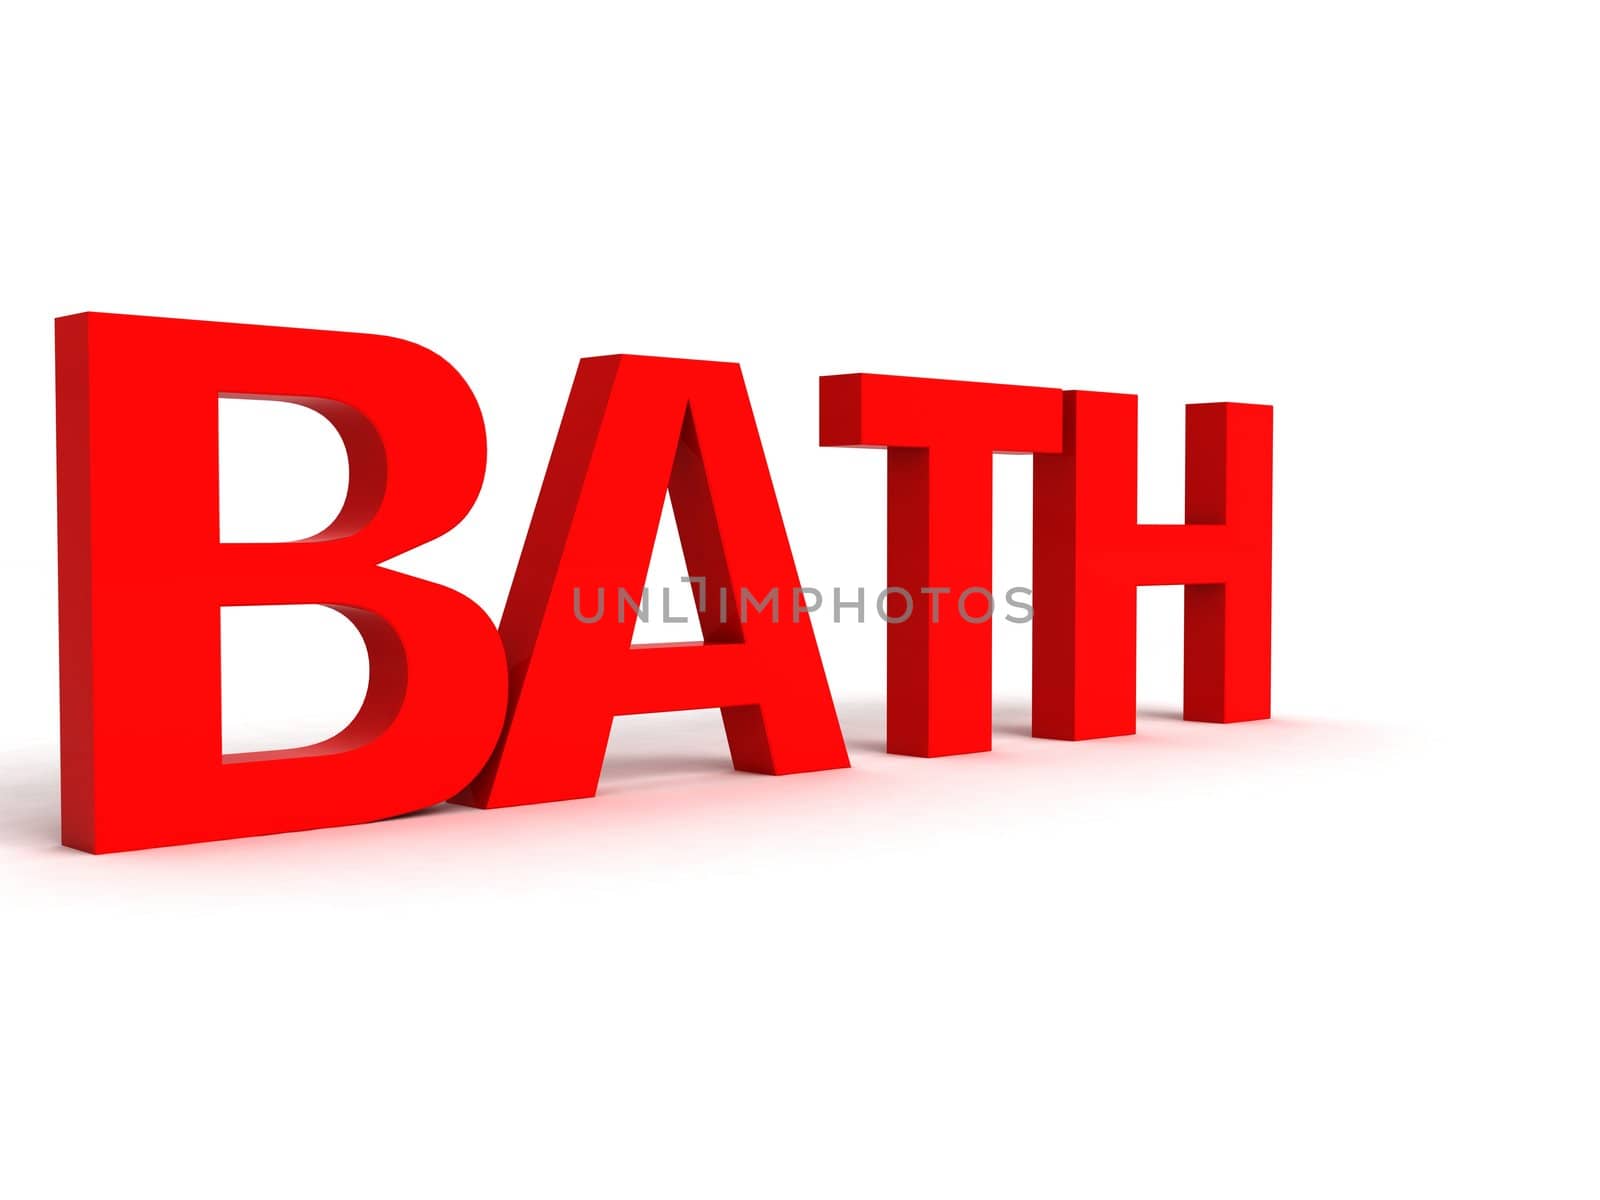 three dimensional side view of bath text by imagerymajestic